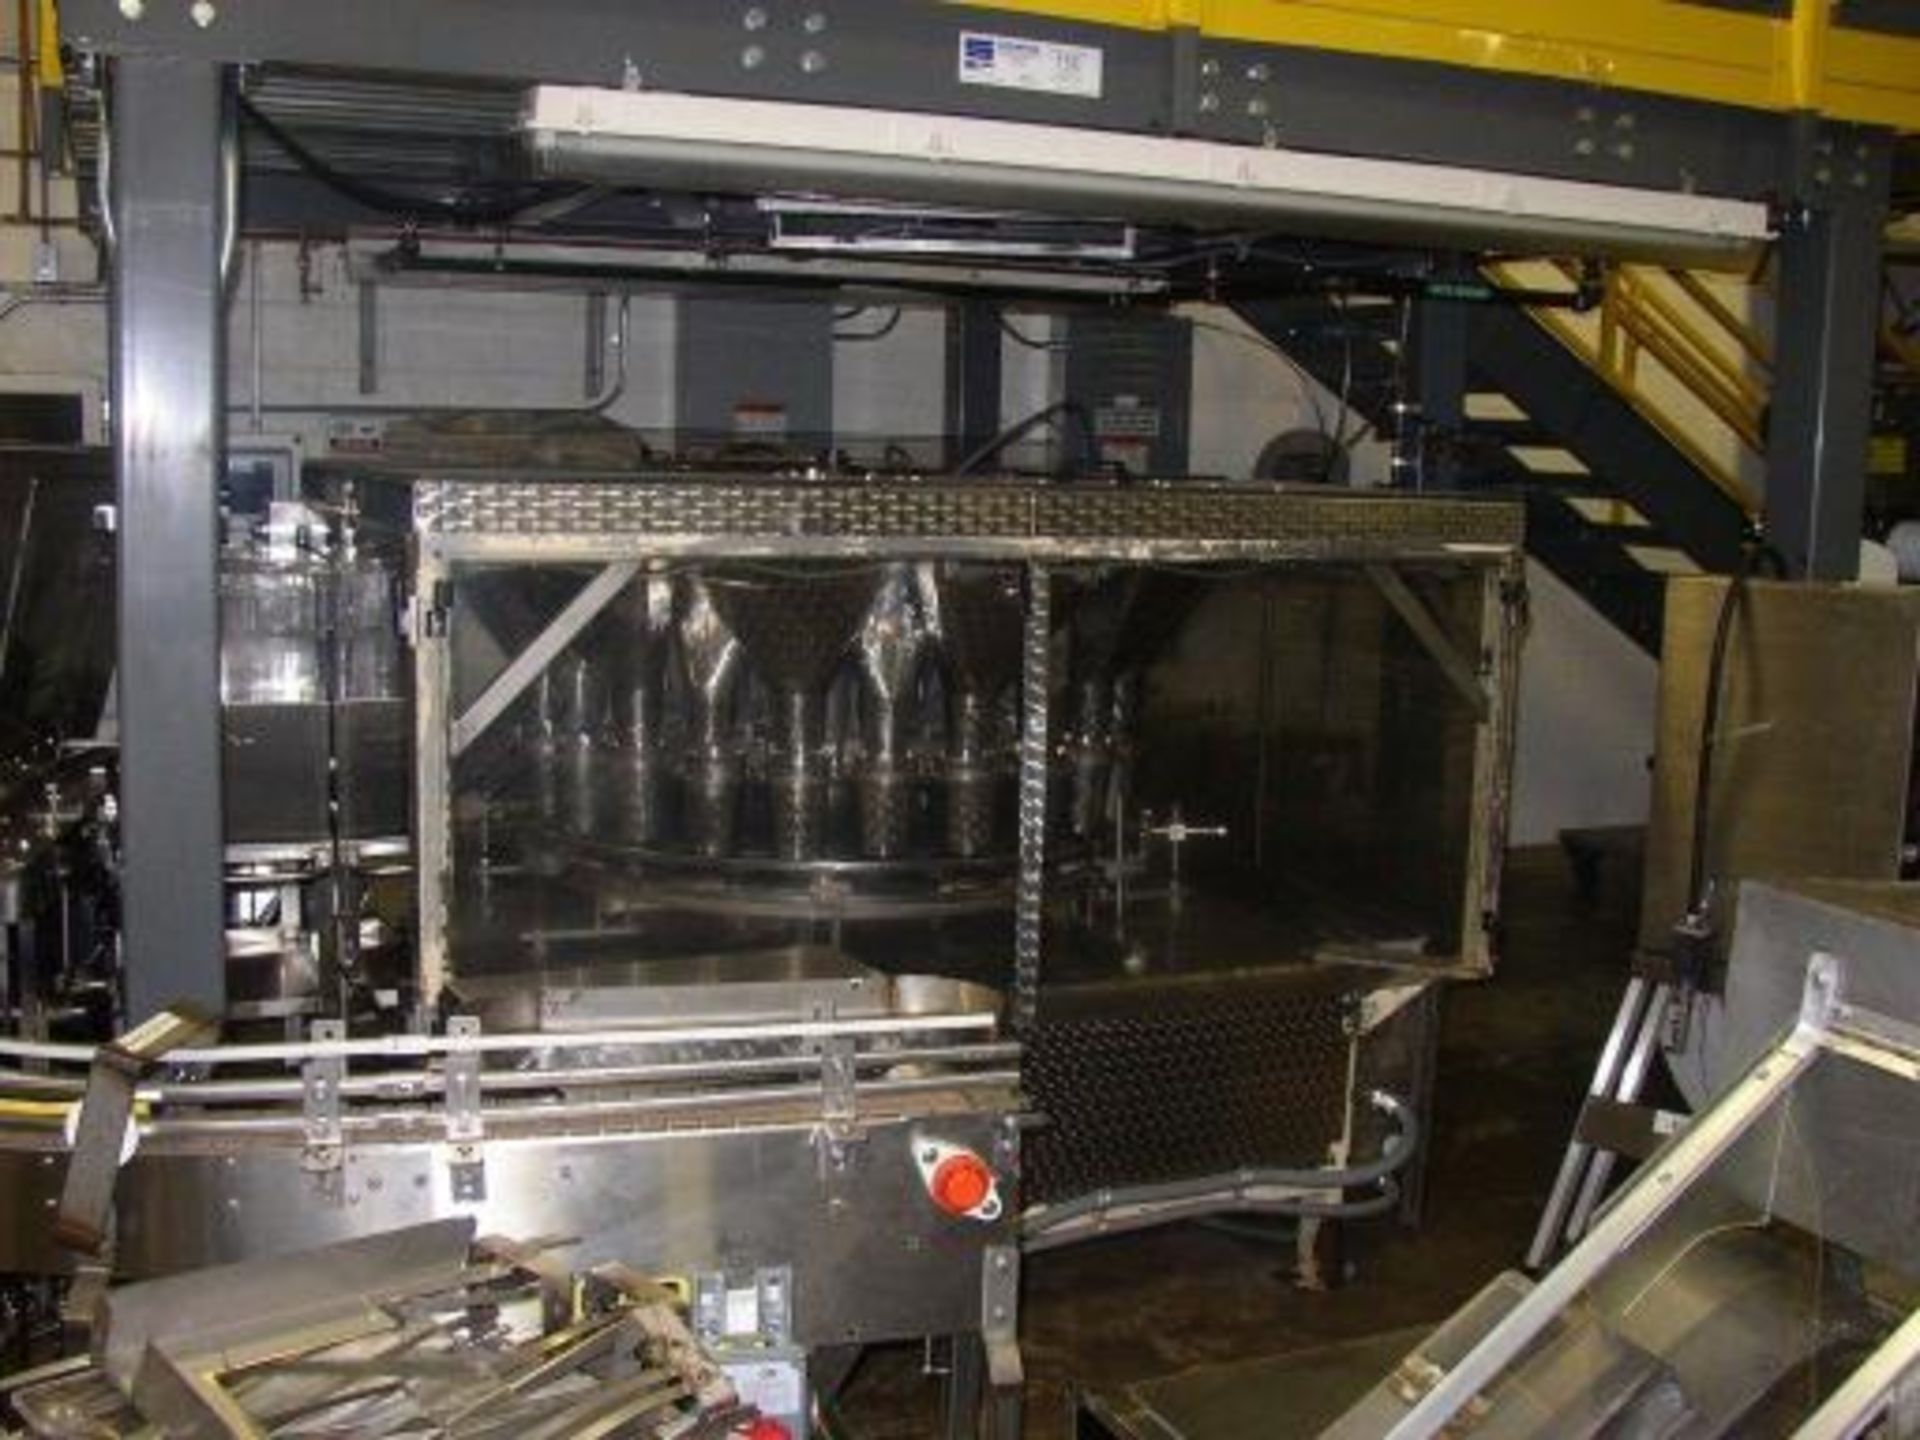 Eagle Packaging can filler Model RF24-0136, was last running 401 x 303 cans. (ET-21764 ) Located